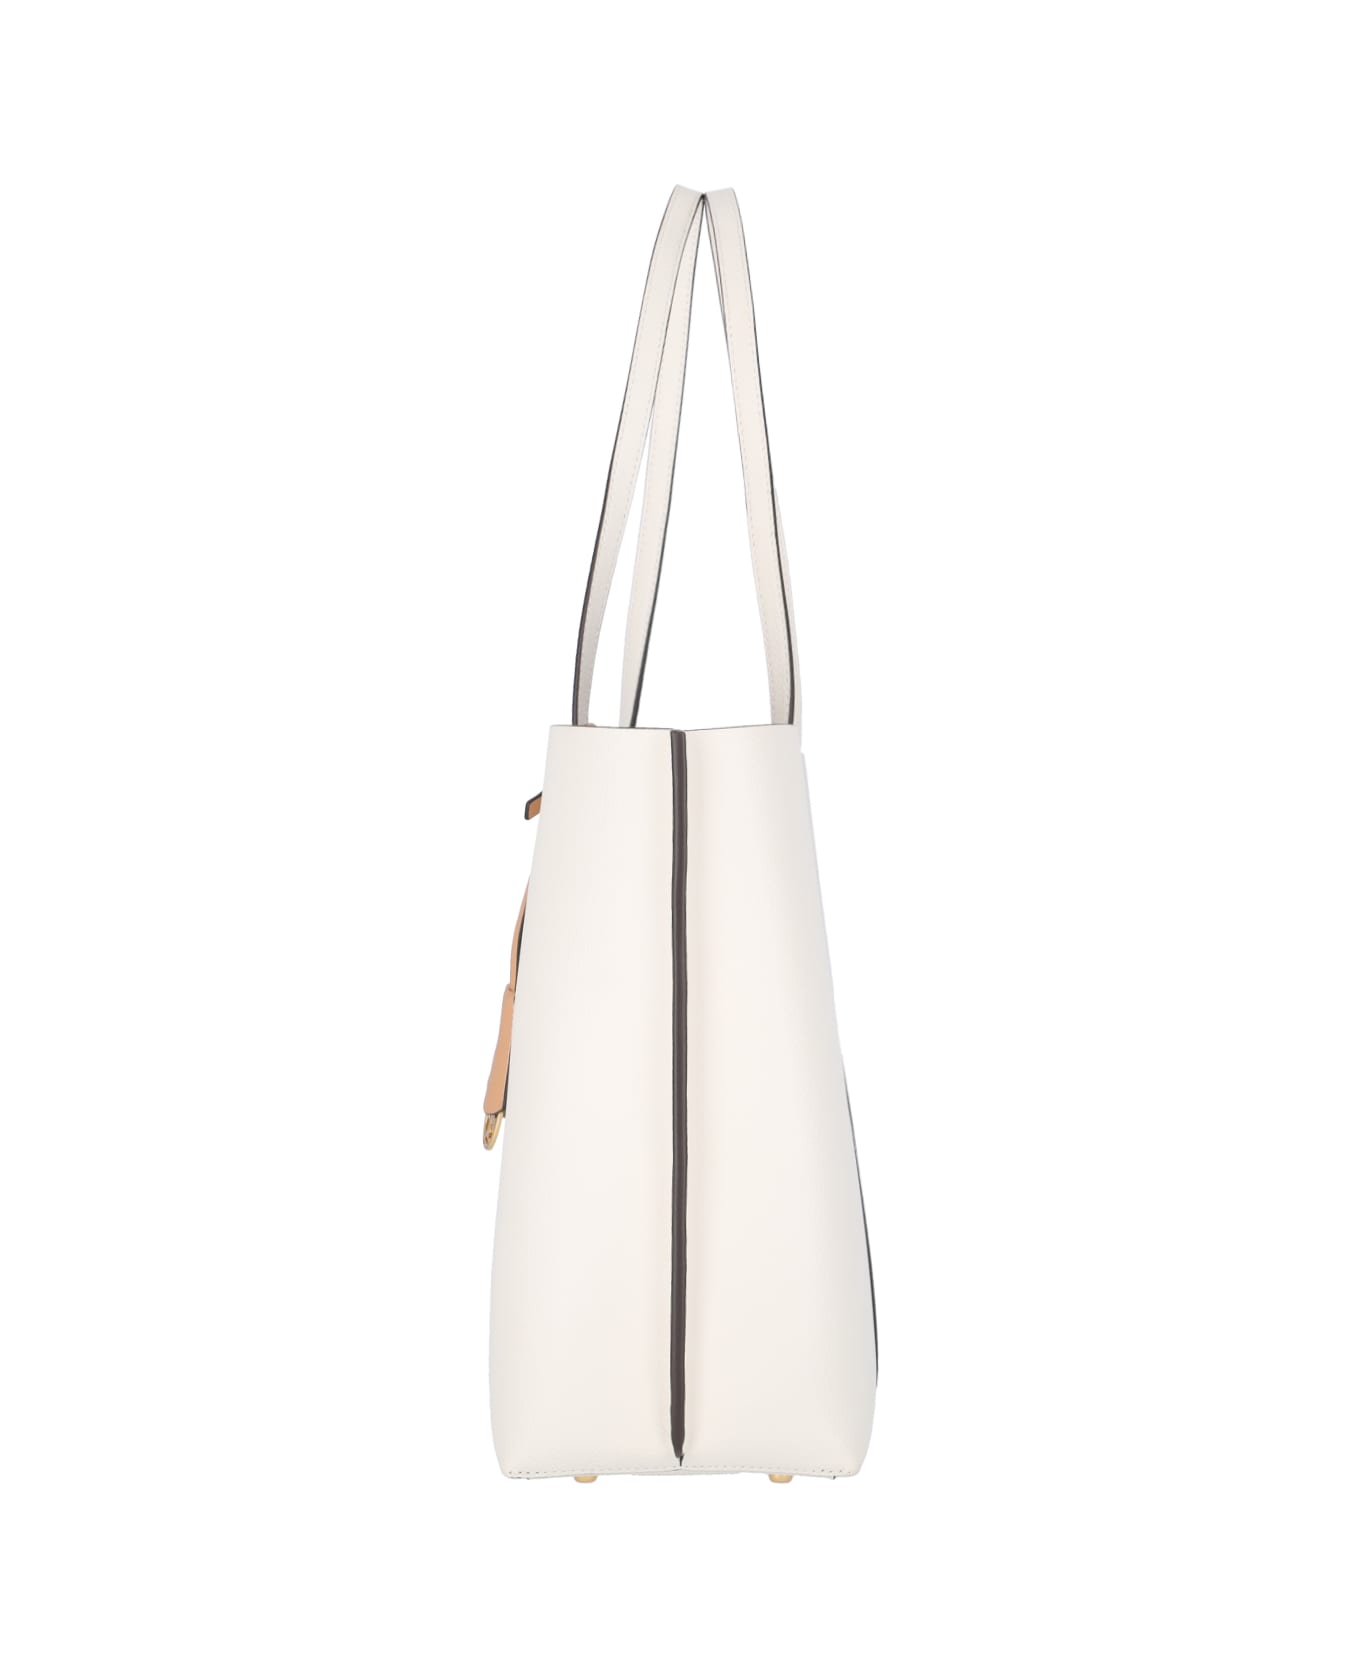 Tory Burch 'perry' Tote Bag - Crema トートバッグ